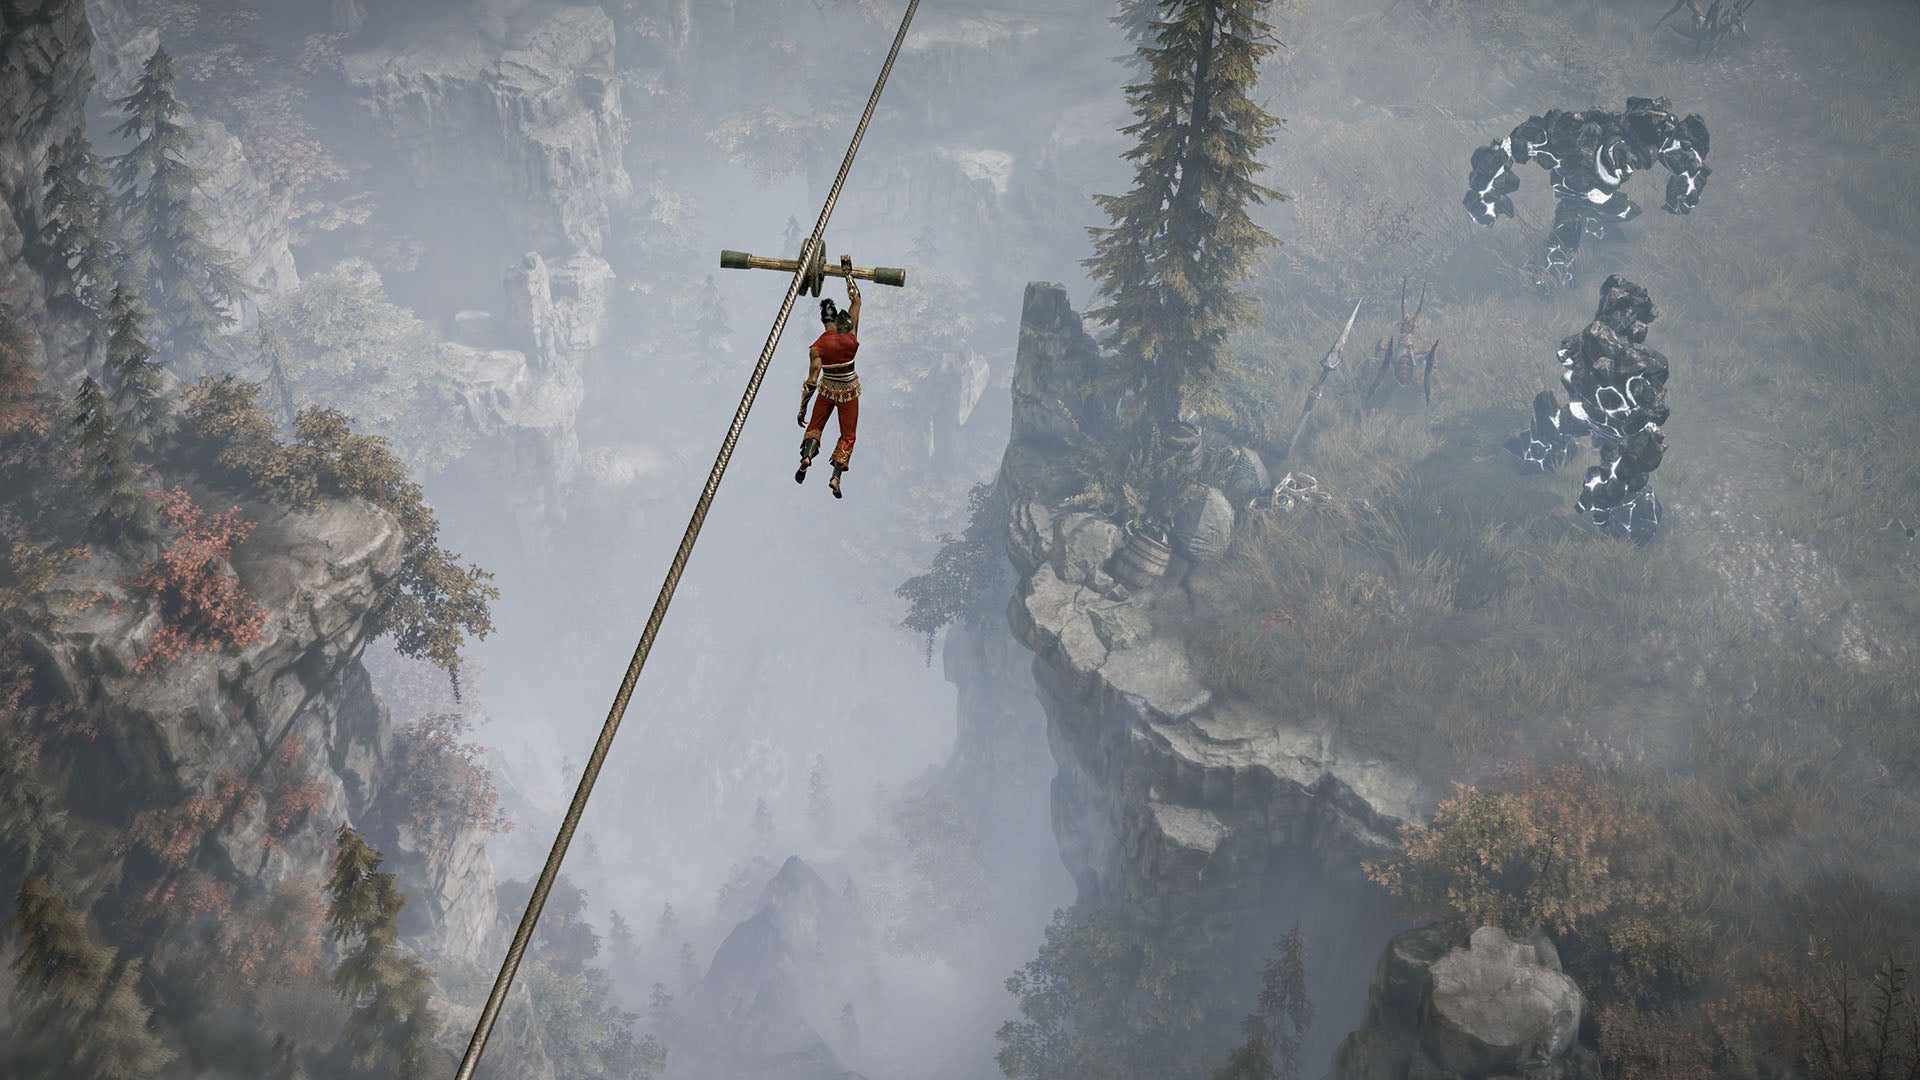 Ziplining over a canyon in Lost Ark